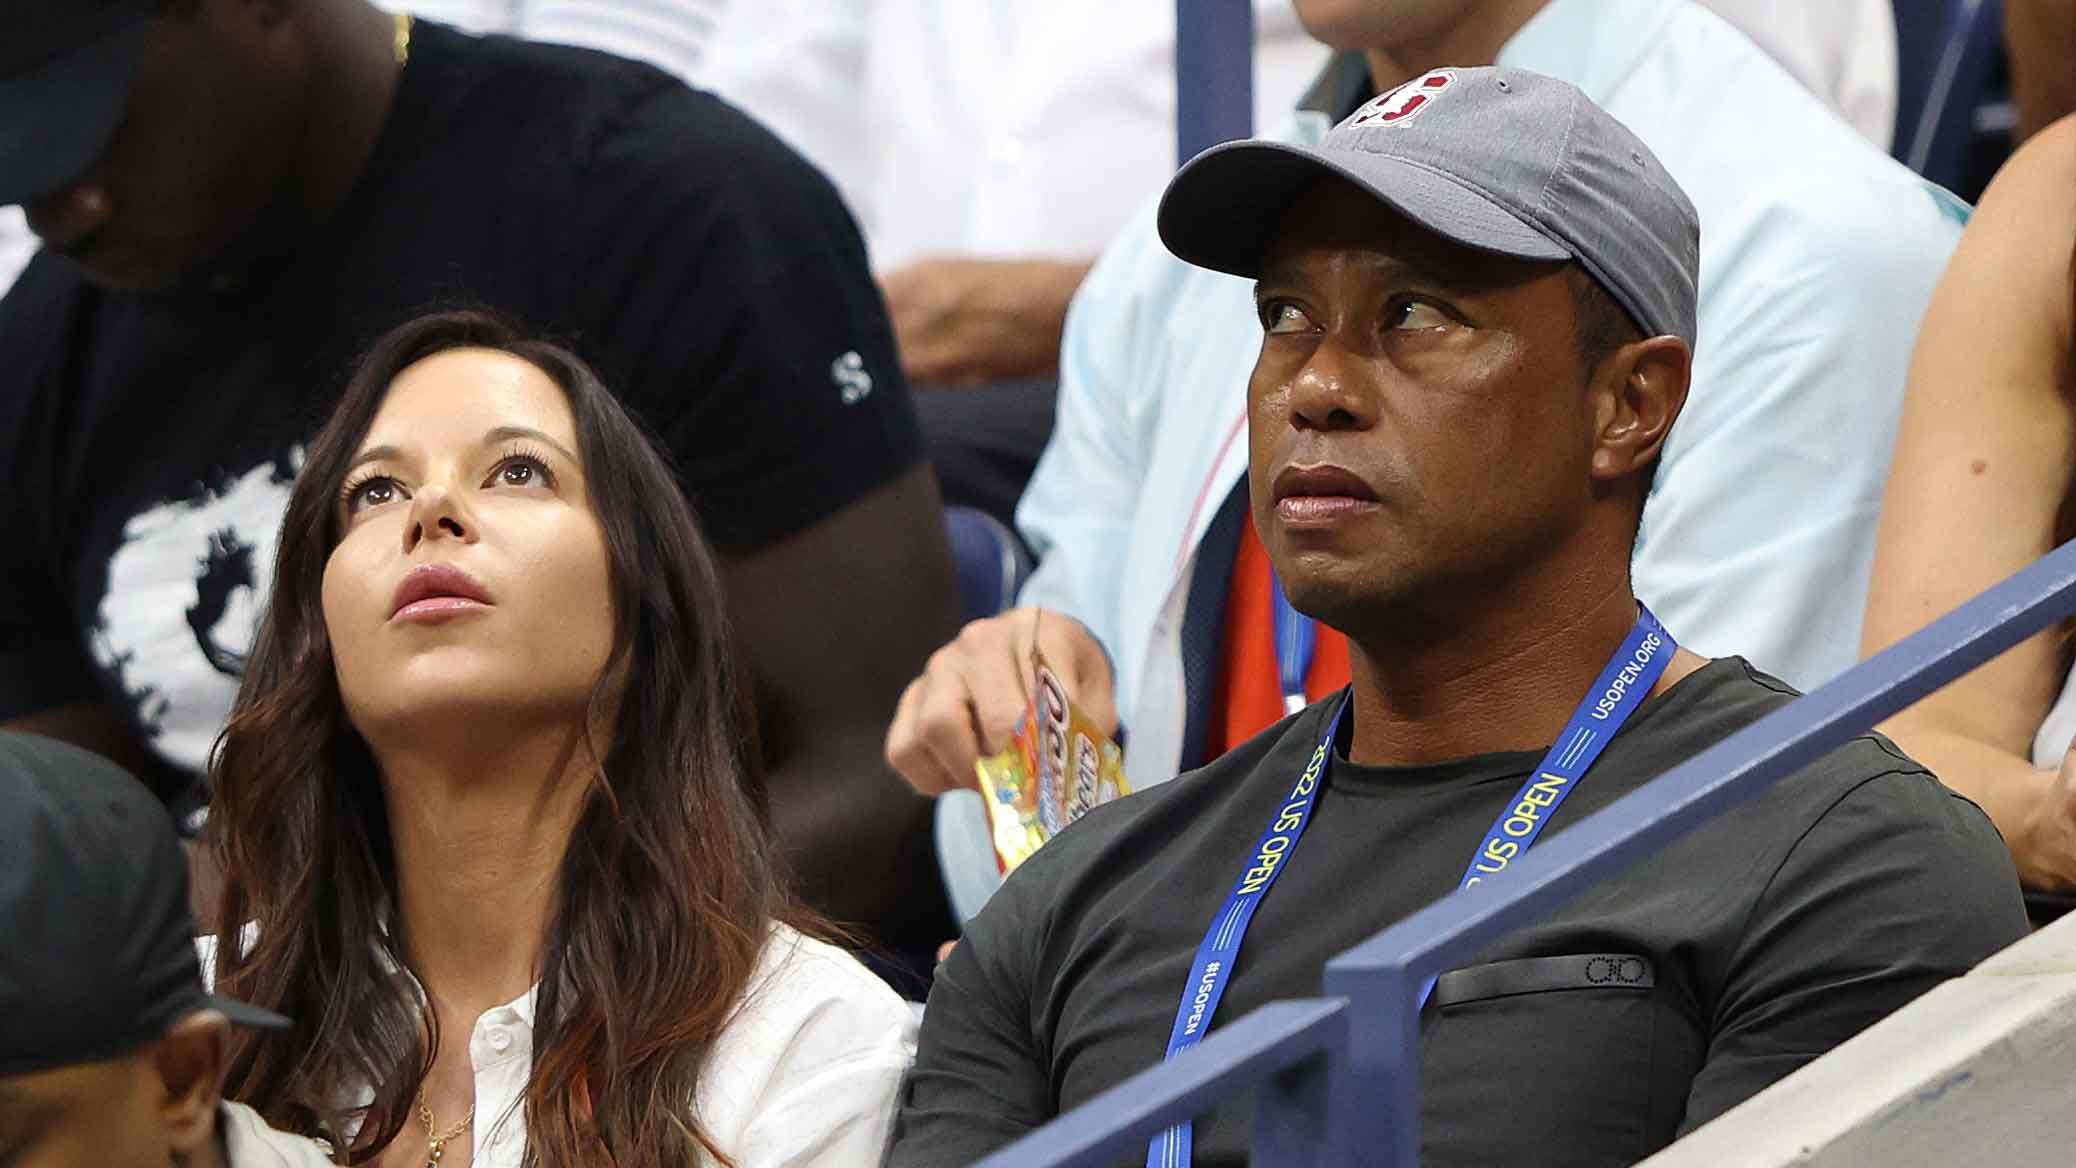 Tiger Woods Ex-Girlfriend Says He Used Lawyer to Break Up With pic